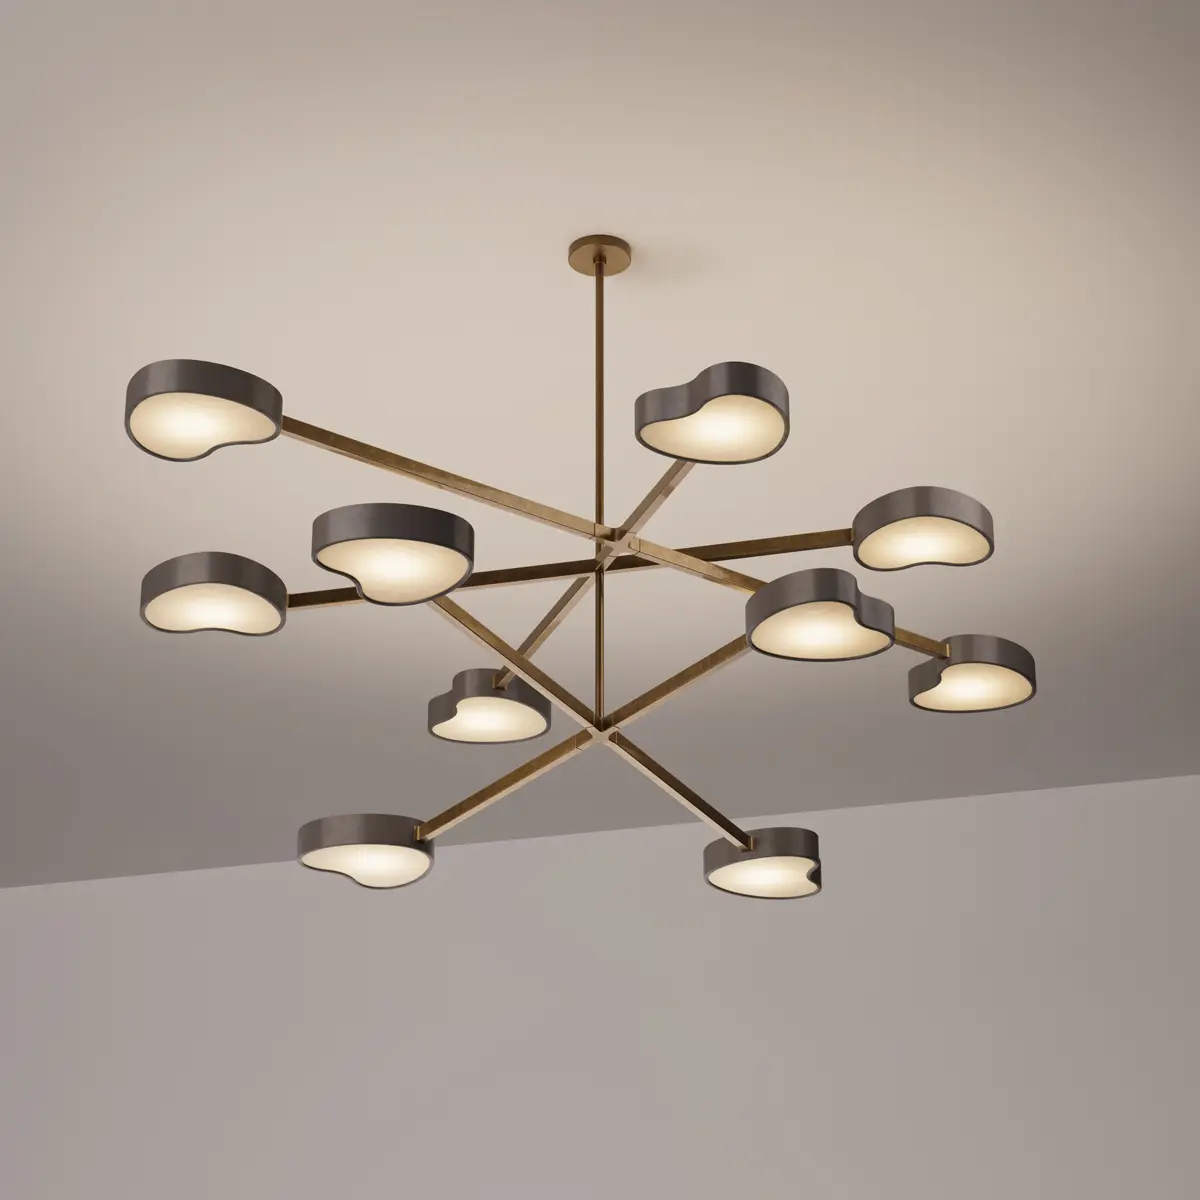 Cuore N10 Ceiling Light by Gaspare Asaro